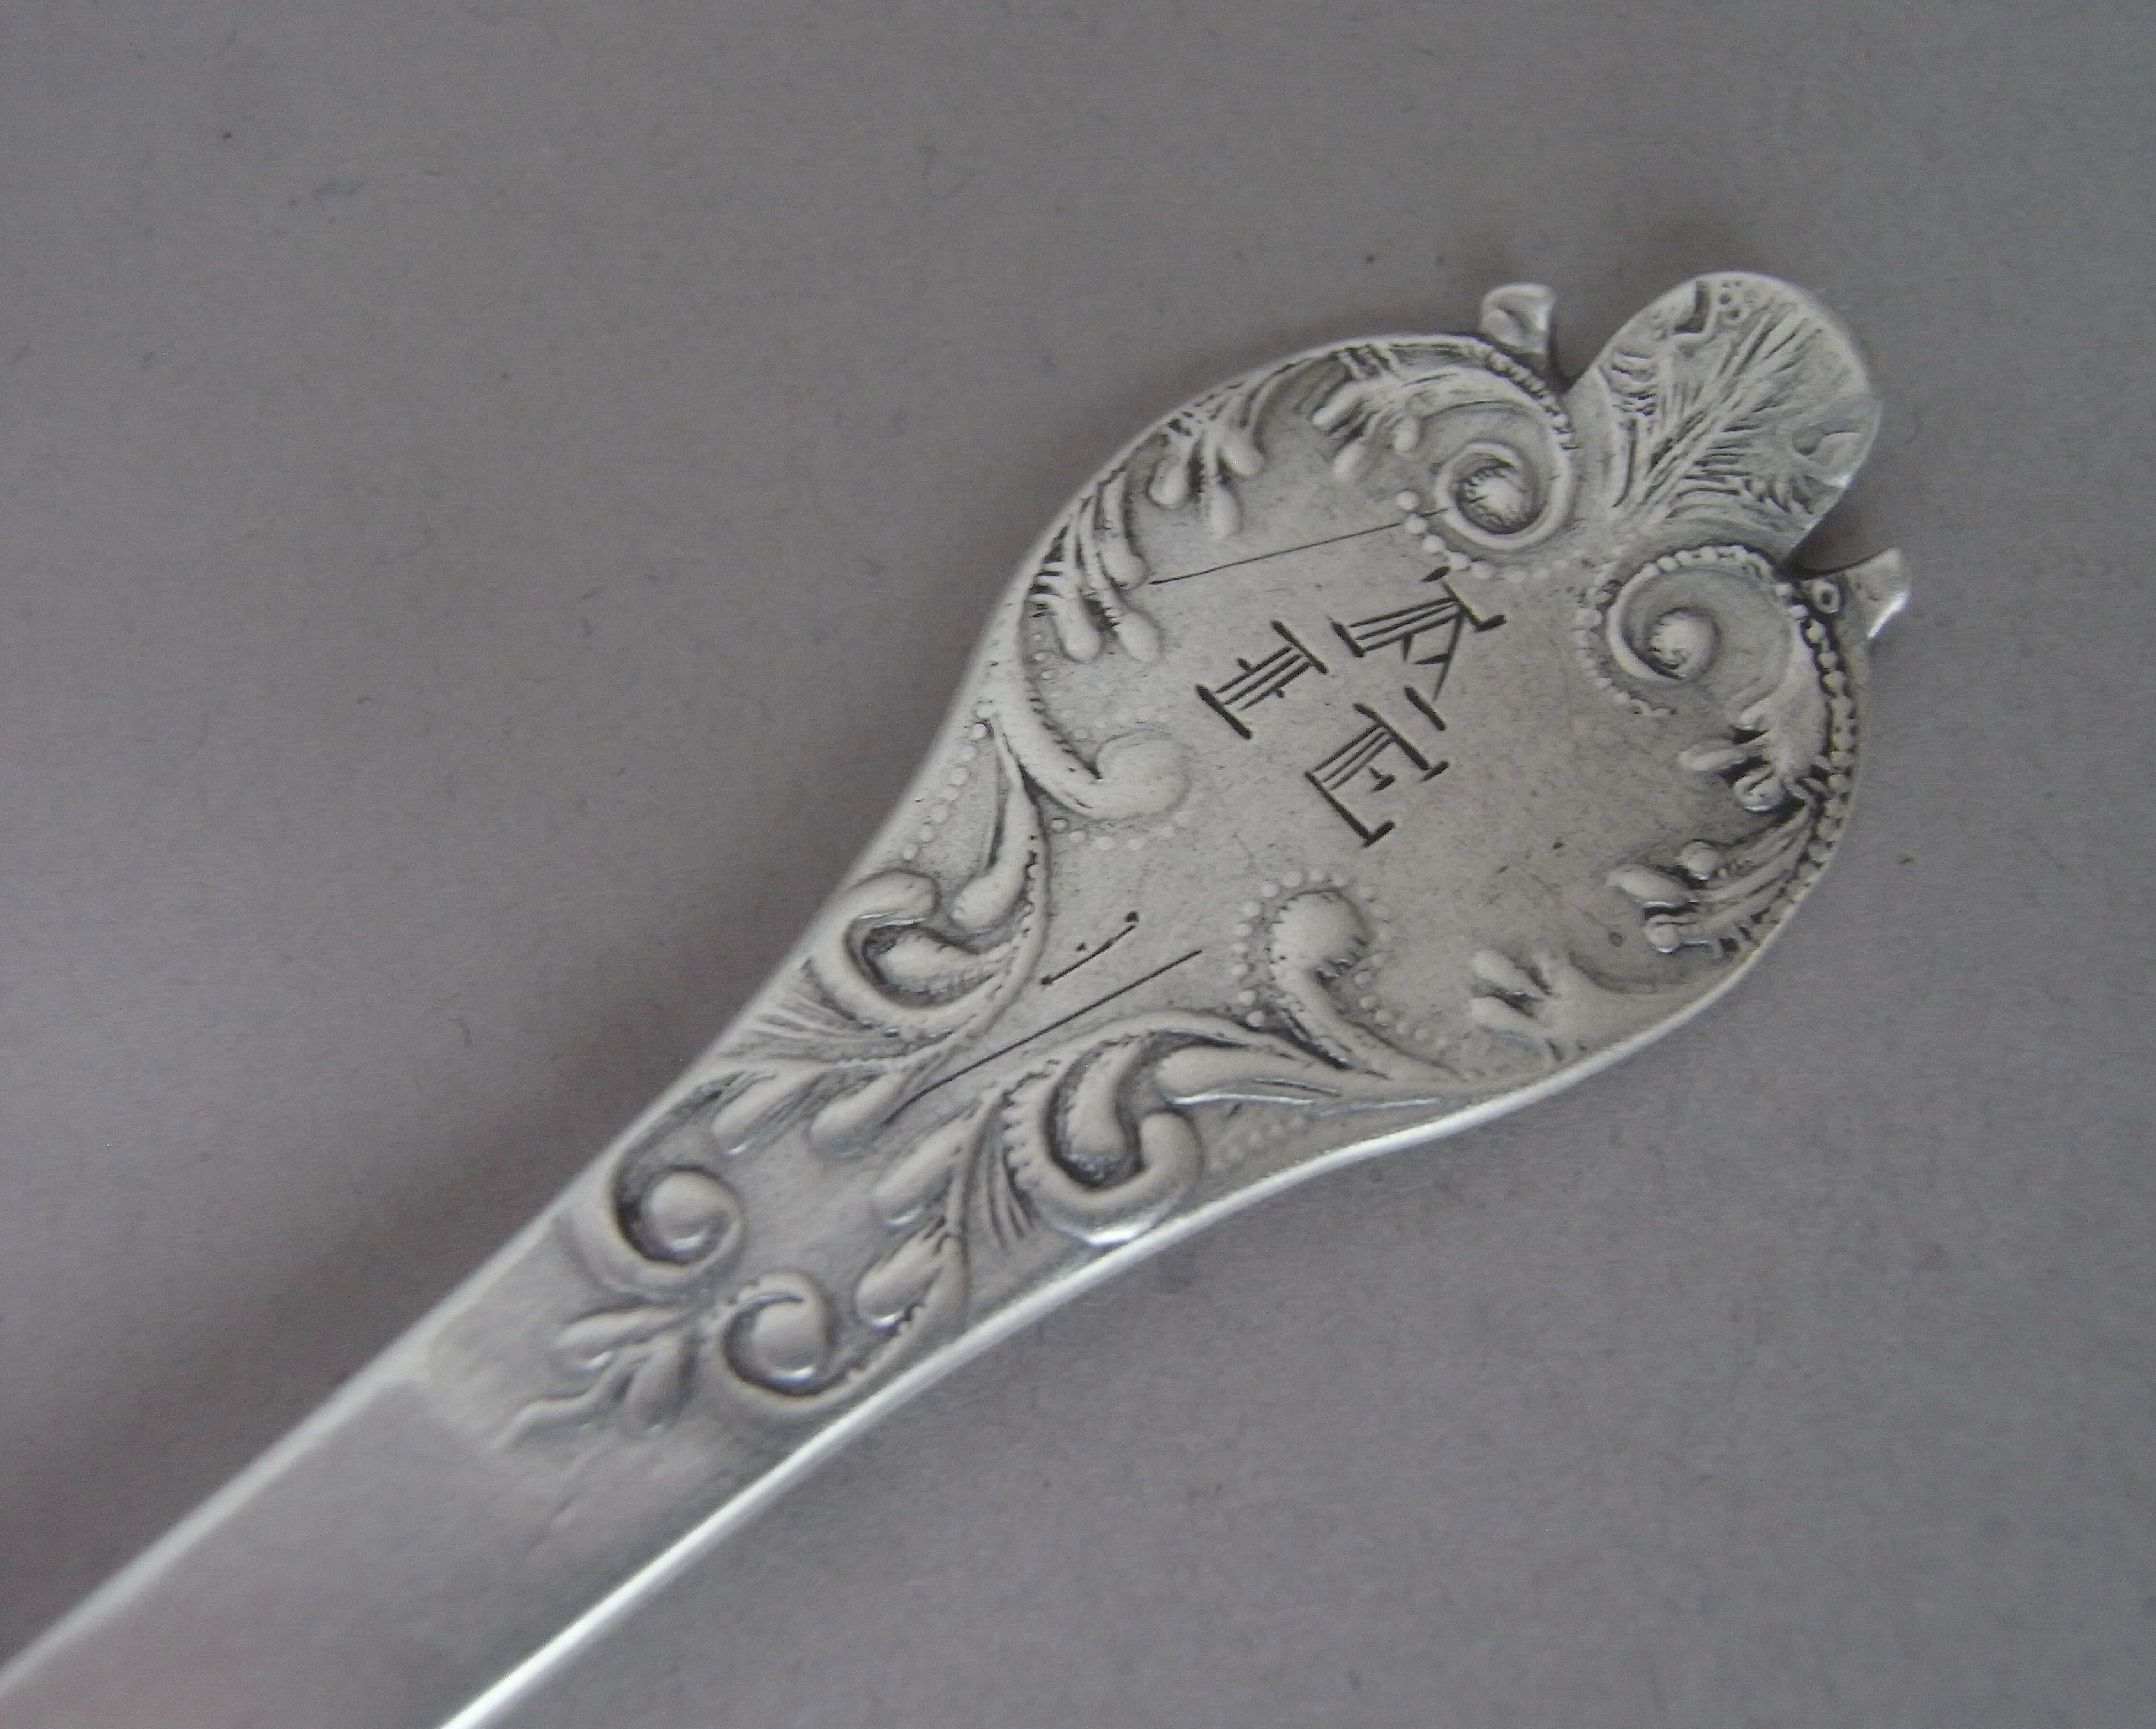 Silver Charles II Laceback Trefid Spoon made in London in 1682 by Lawrence Coles